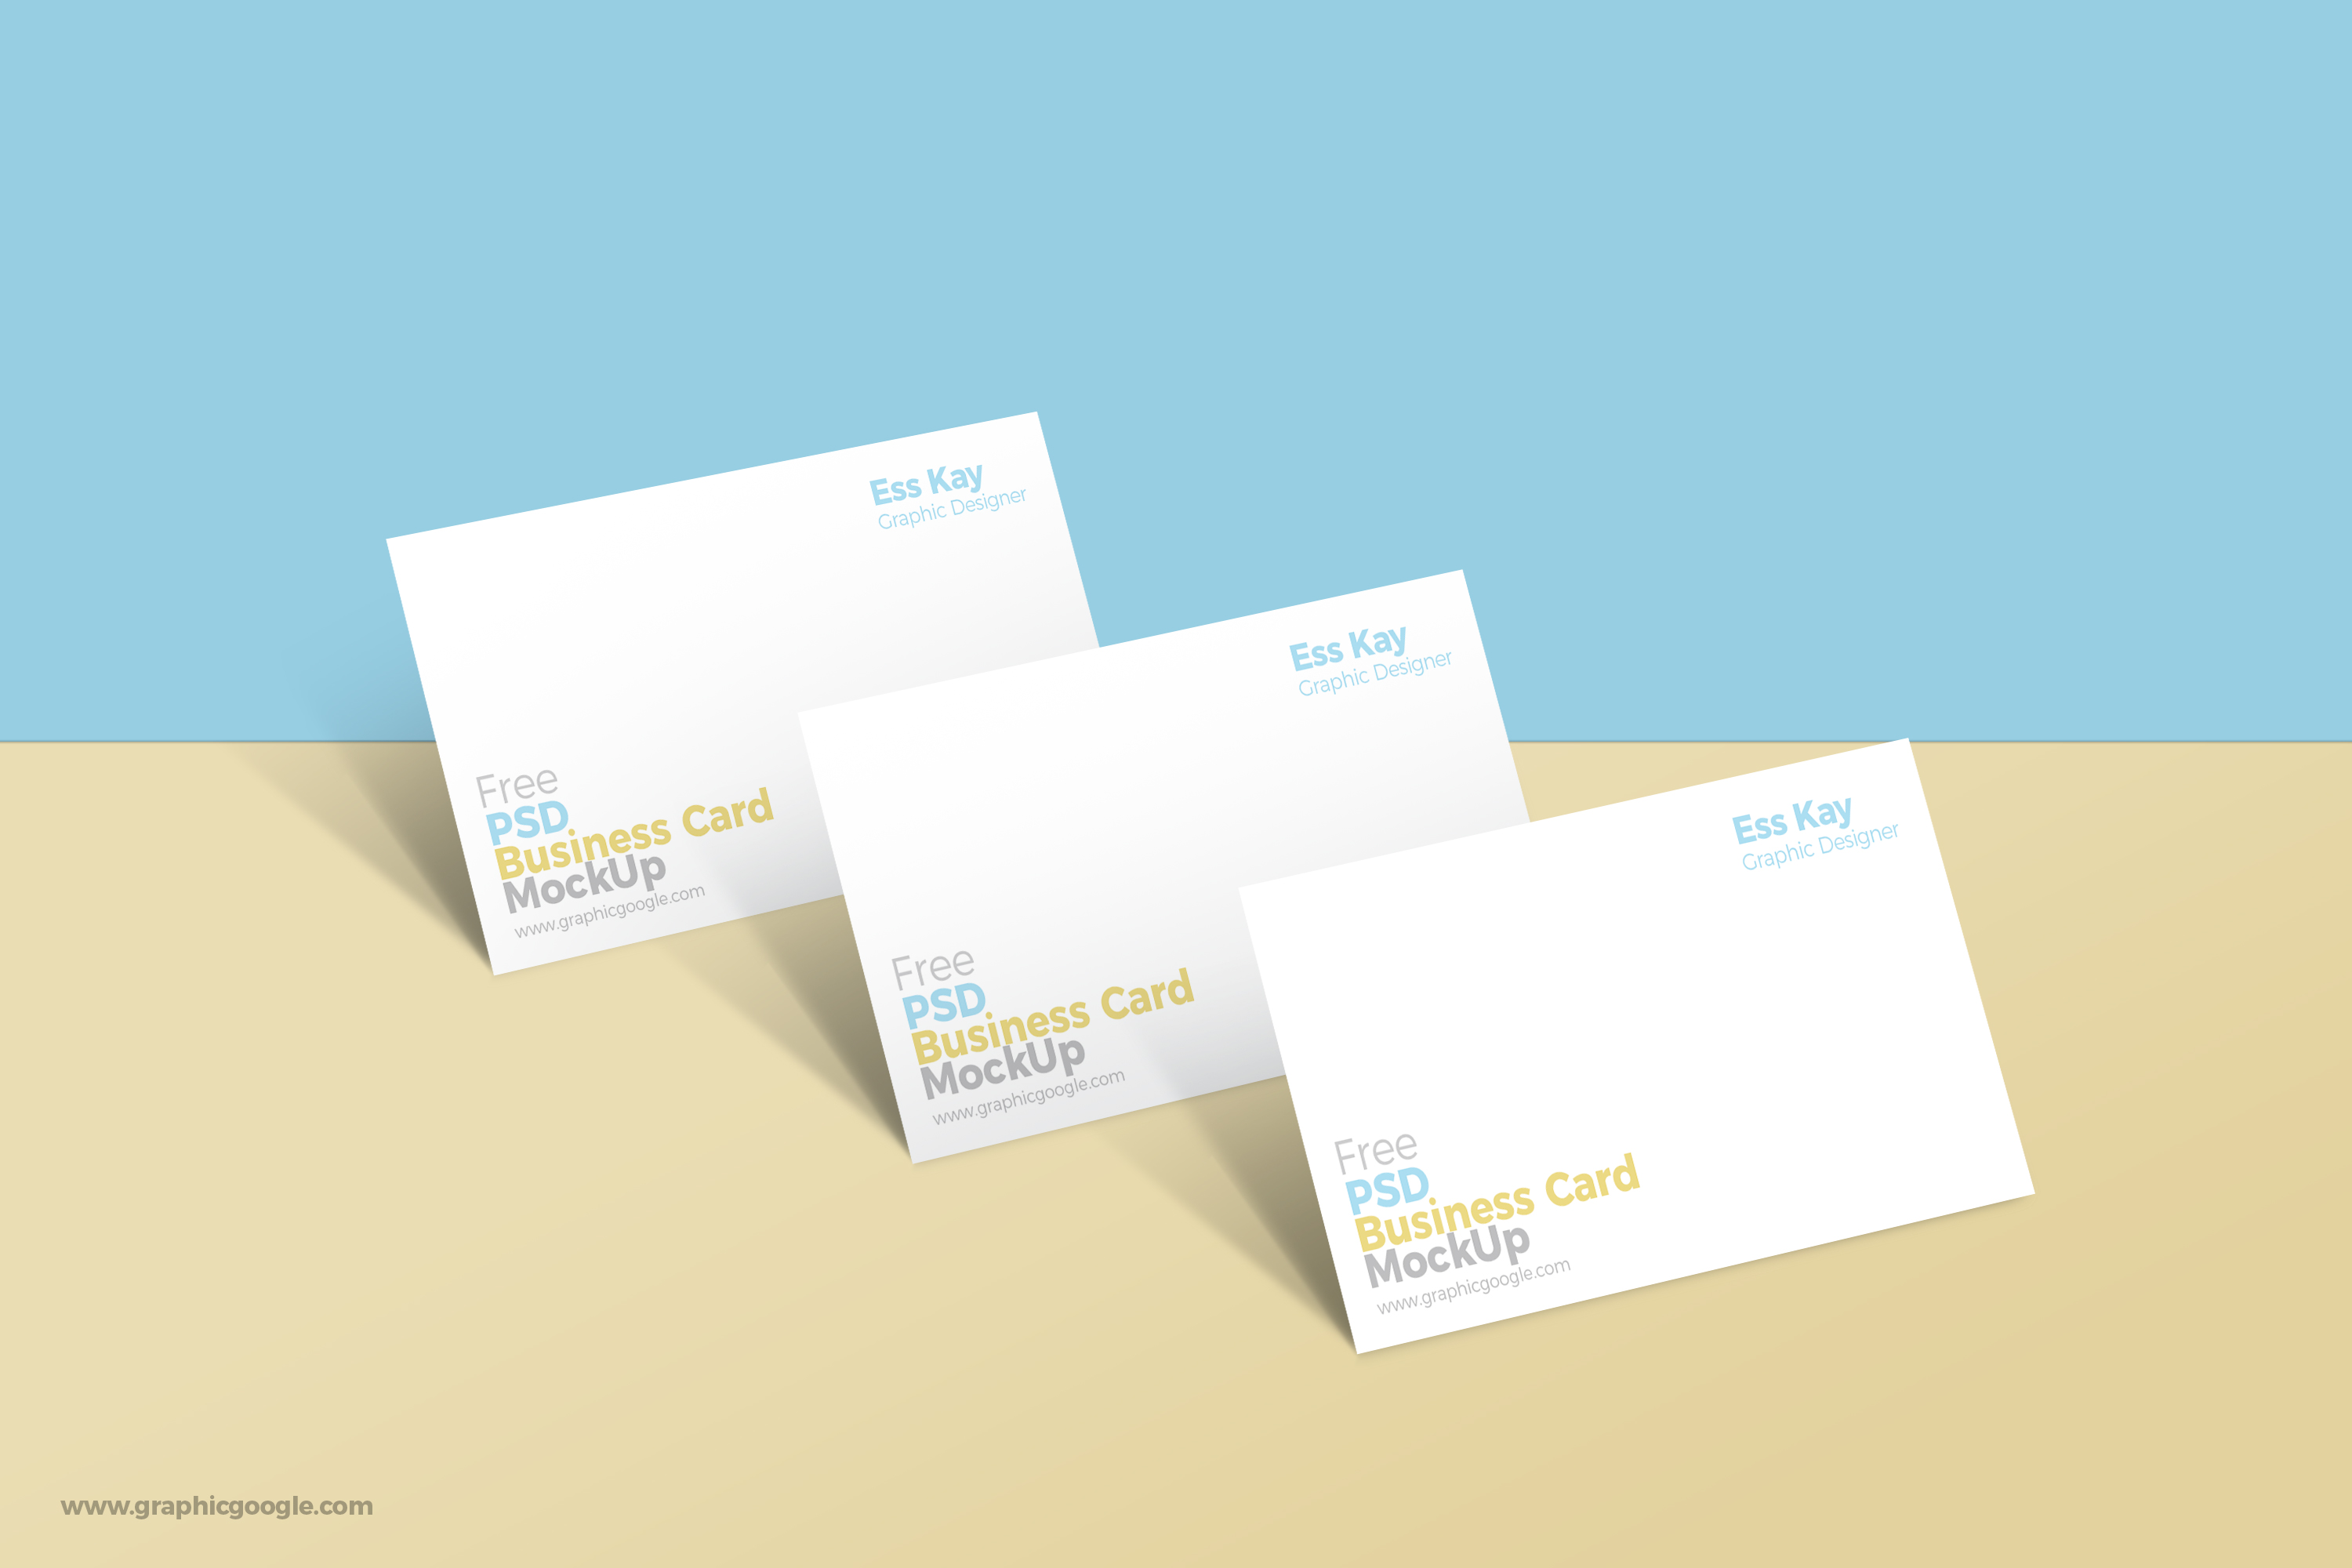 Download Free PSD Business Card MockUp - Engine Templates